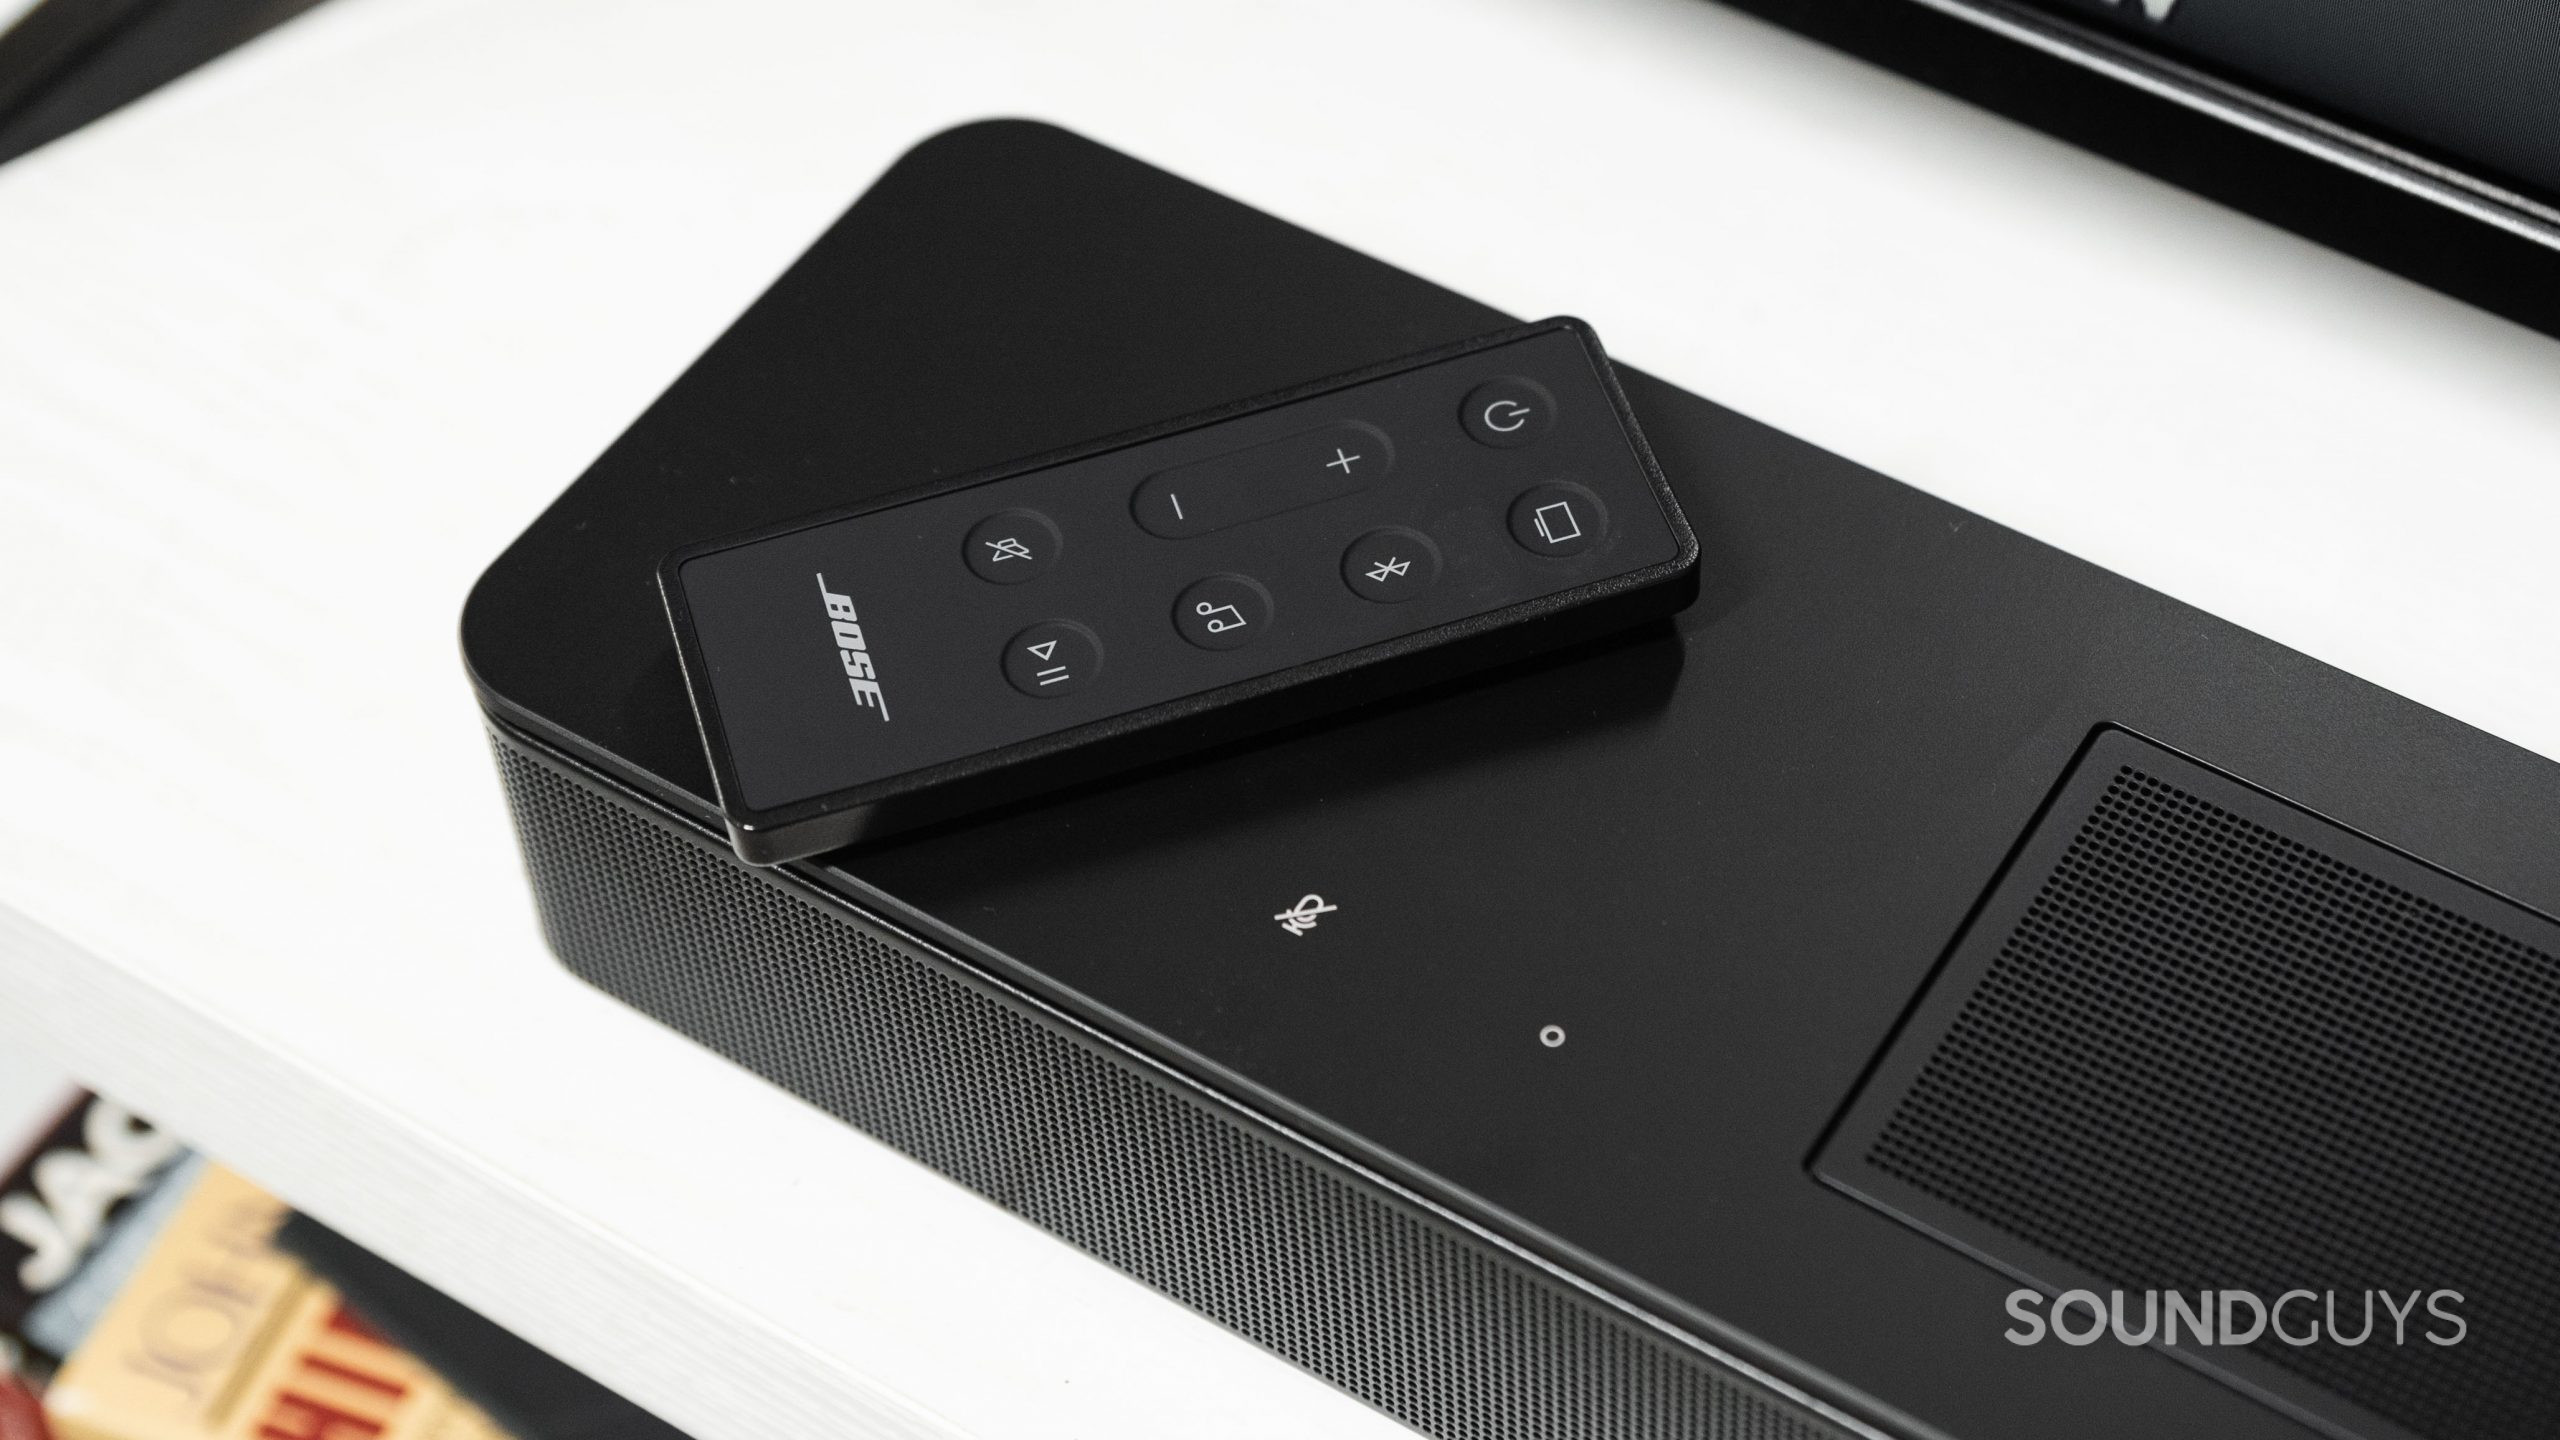 The remote for the Bose Smart Soundbar 600 rests on top of the speaker.